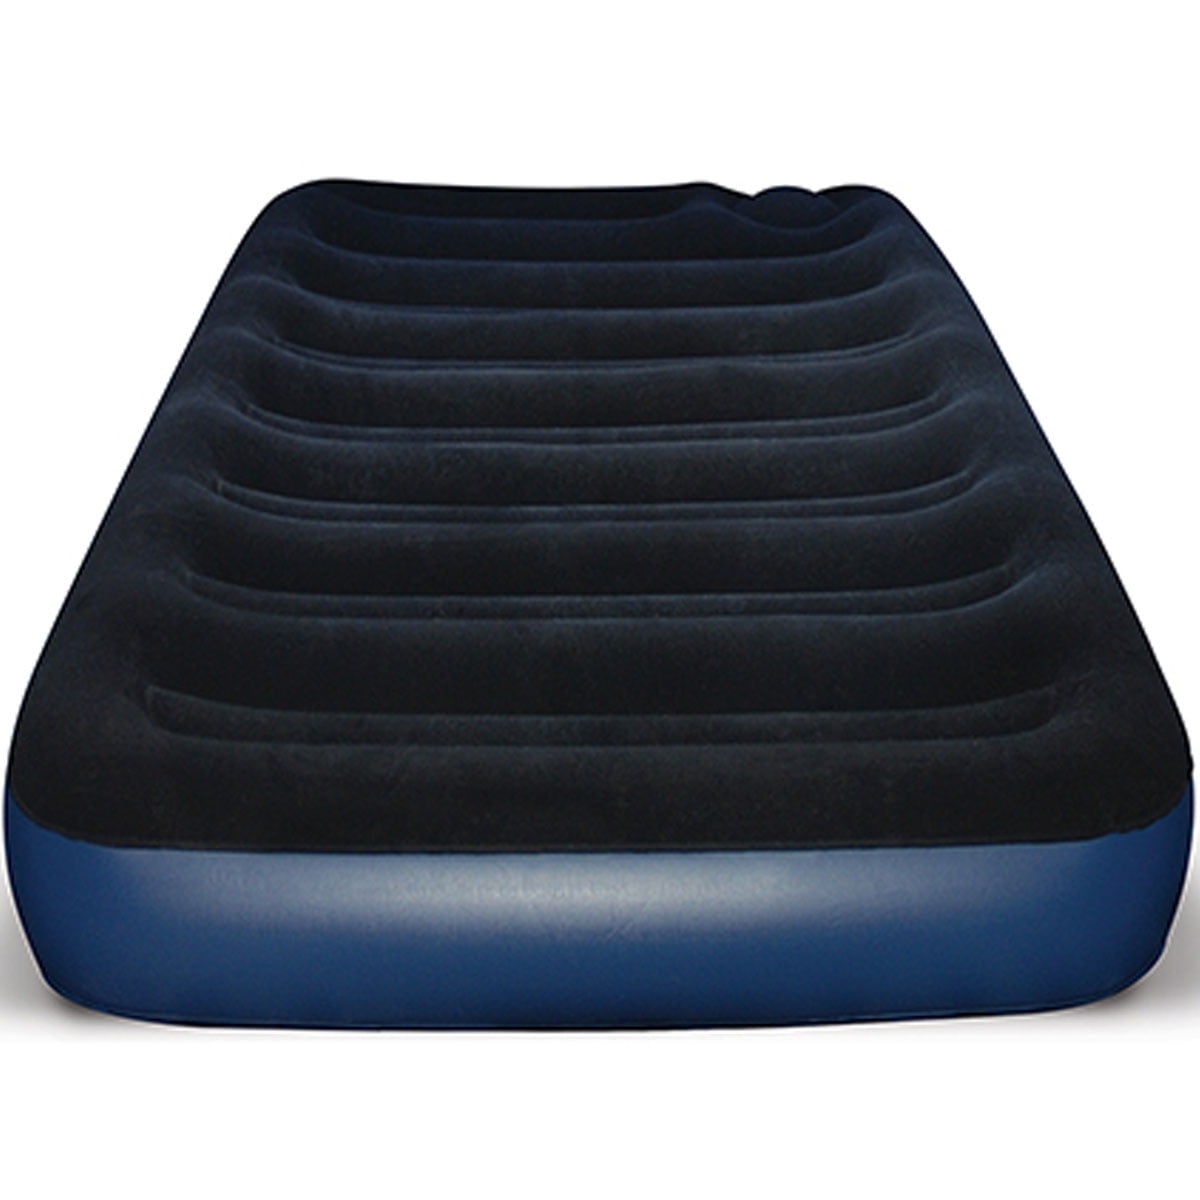 Napier 5 in Air Mattress, with Built-in Pump, Full